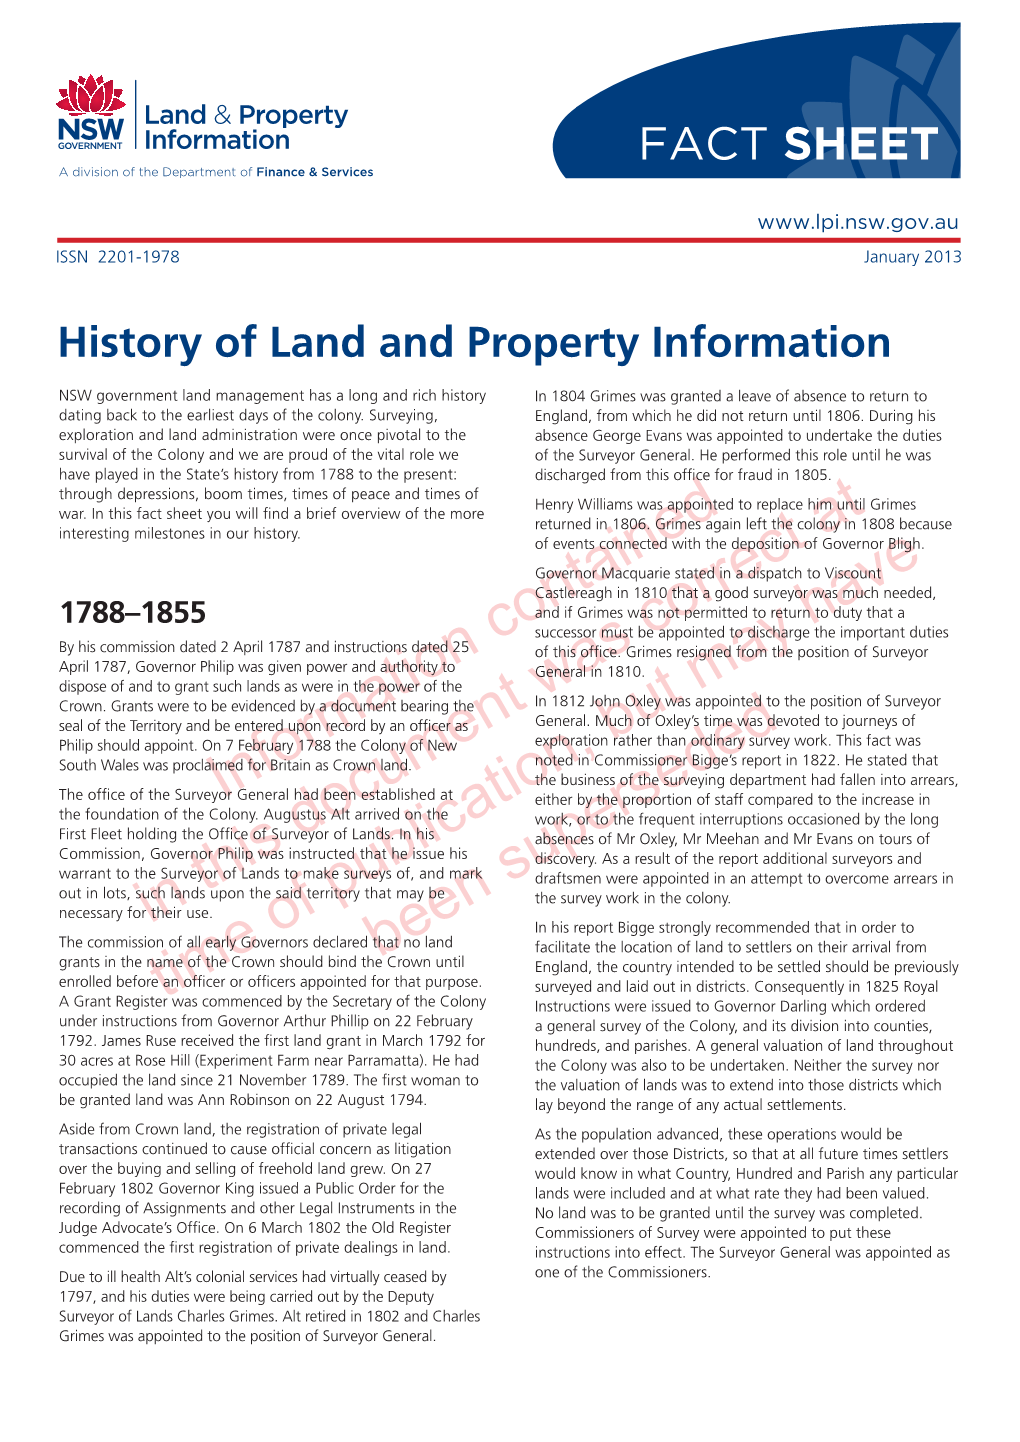 Brief History of Land and Property In